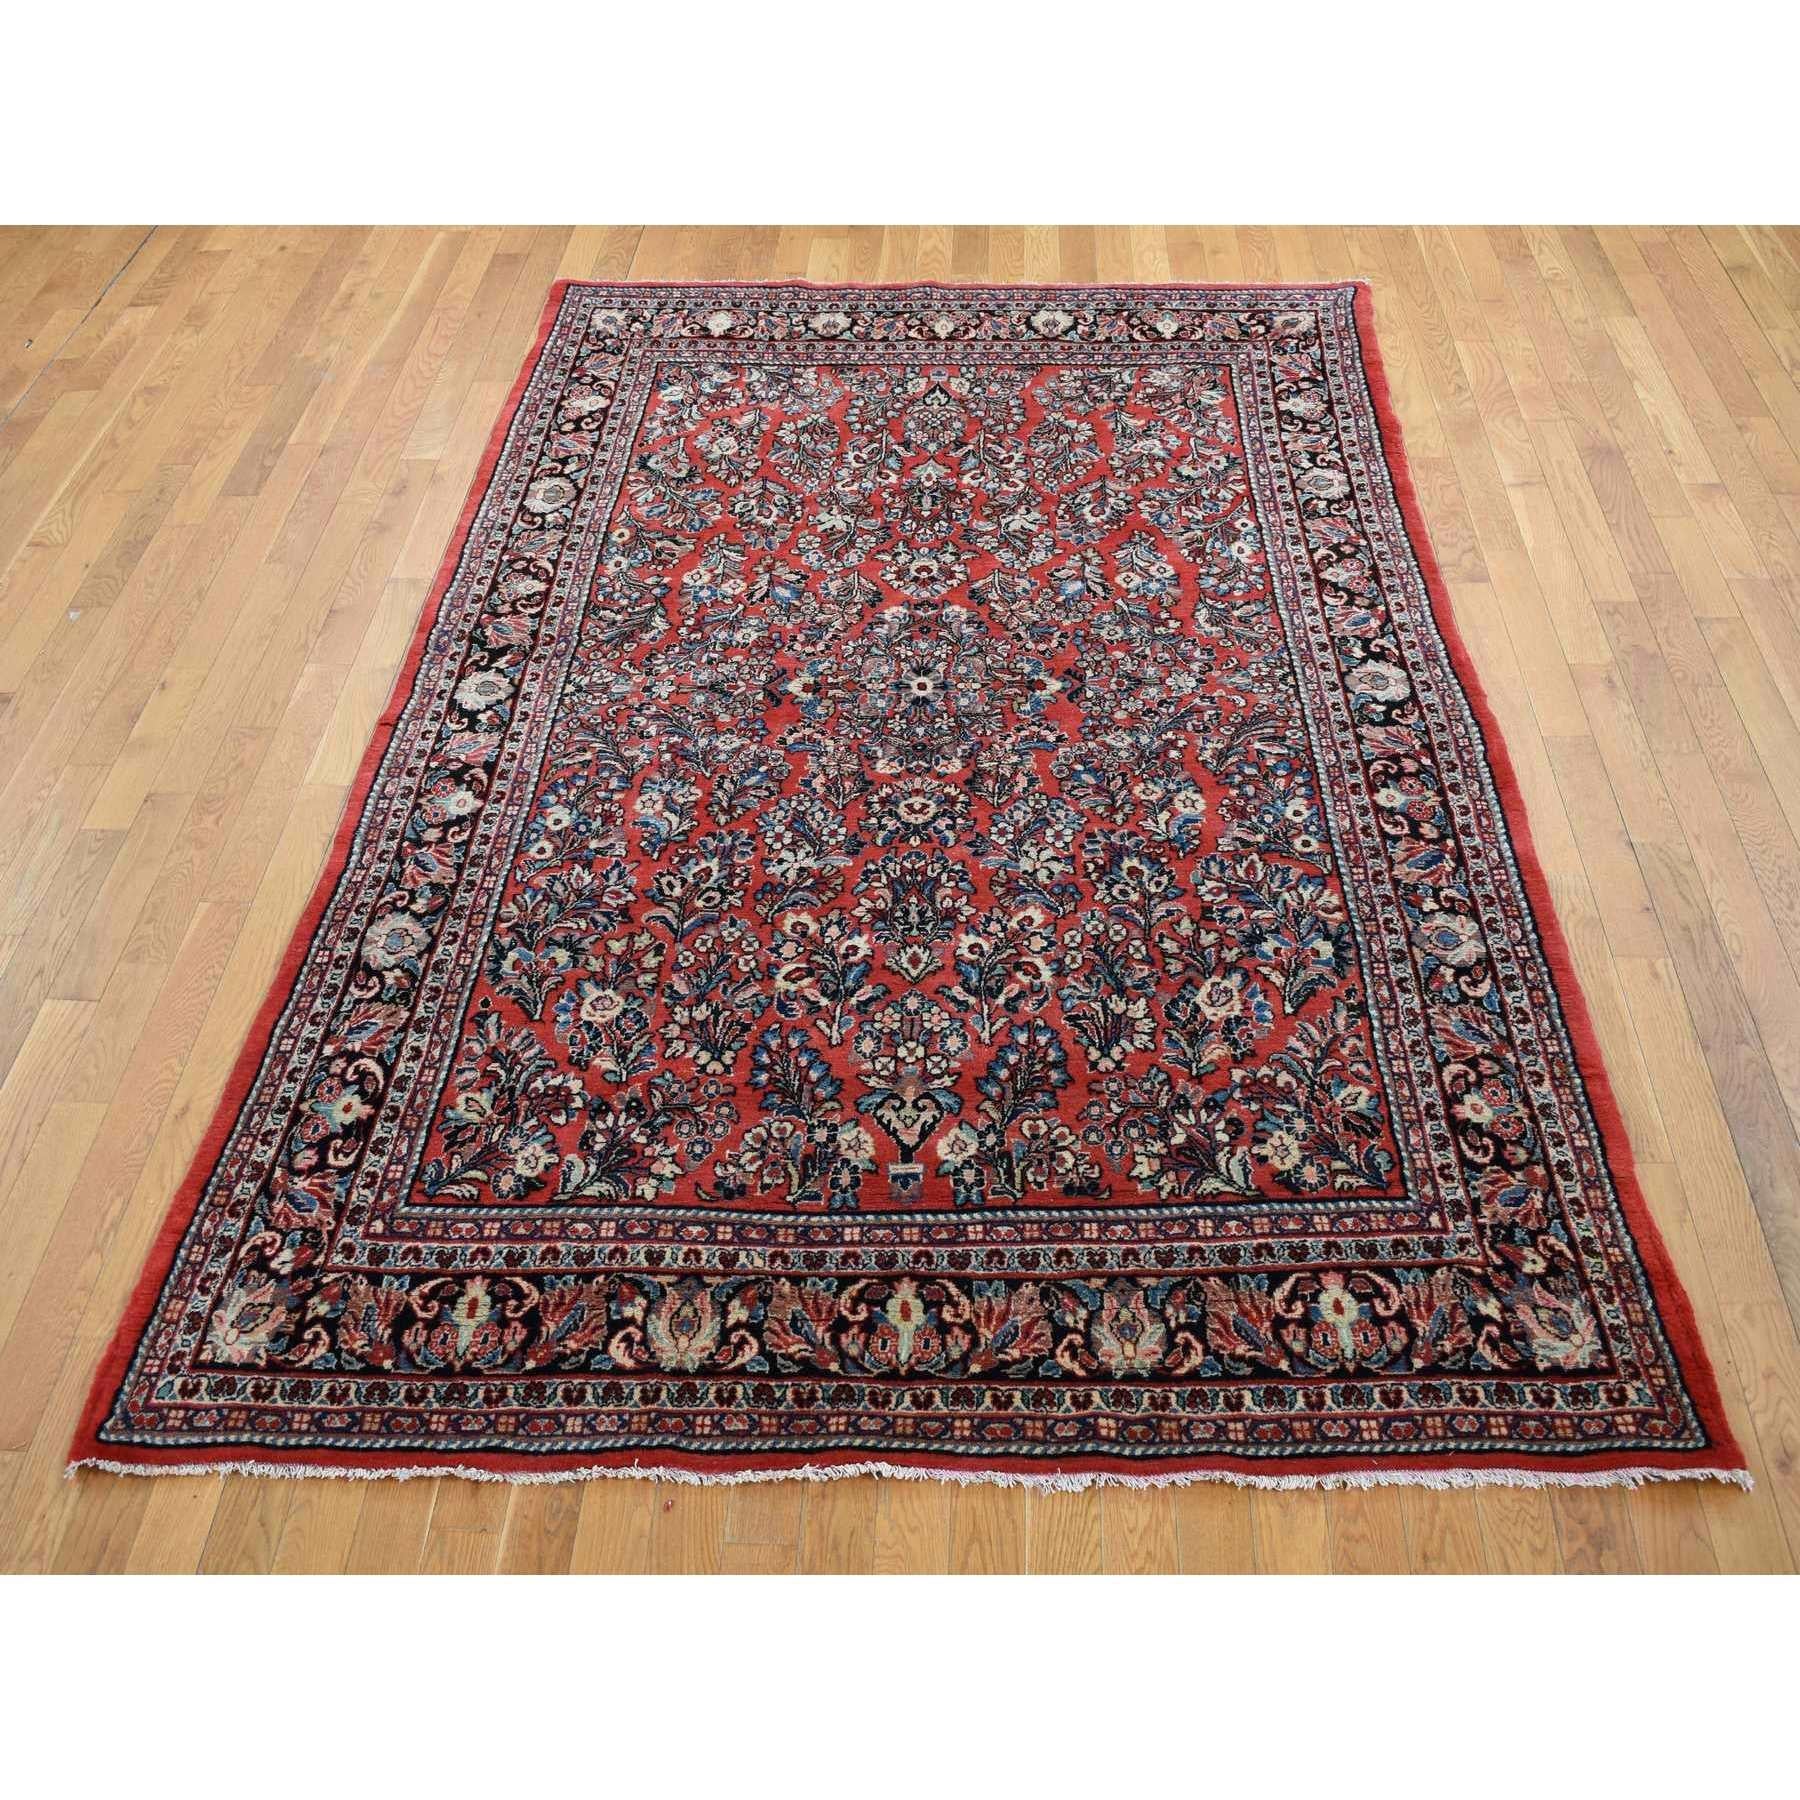 This fabulous Hand-Knotted carpet has been created and designed for extra strength and durability. This rug has been handcrafted for weeks in the traditional method that is used to make
Exact Rug Size in Feet and Inches : 6'3